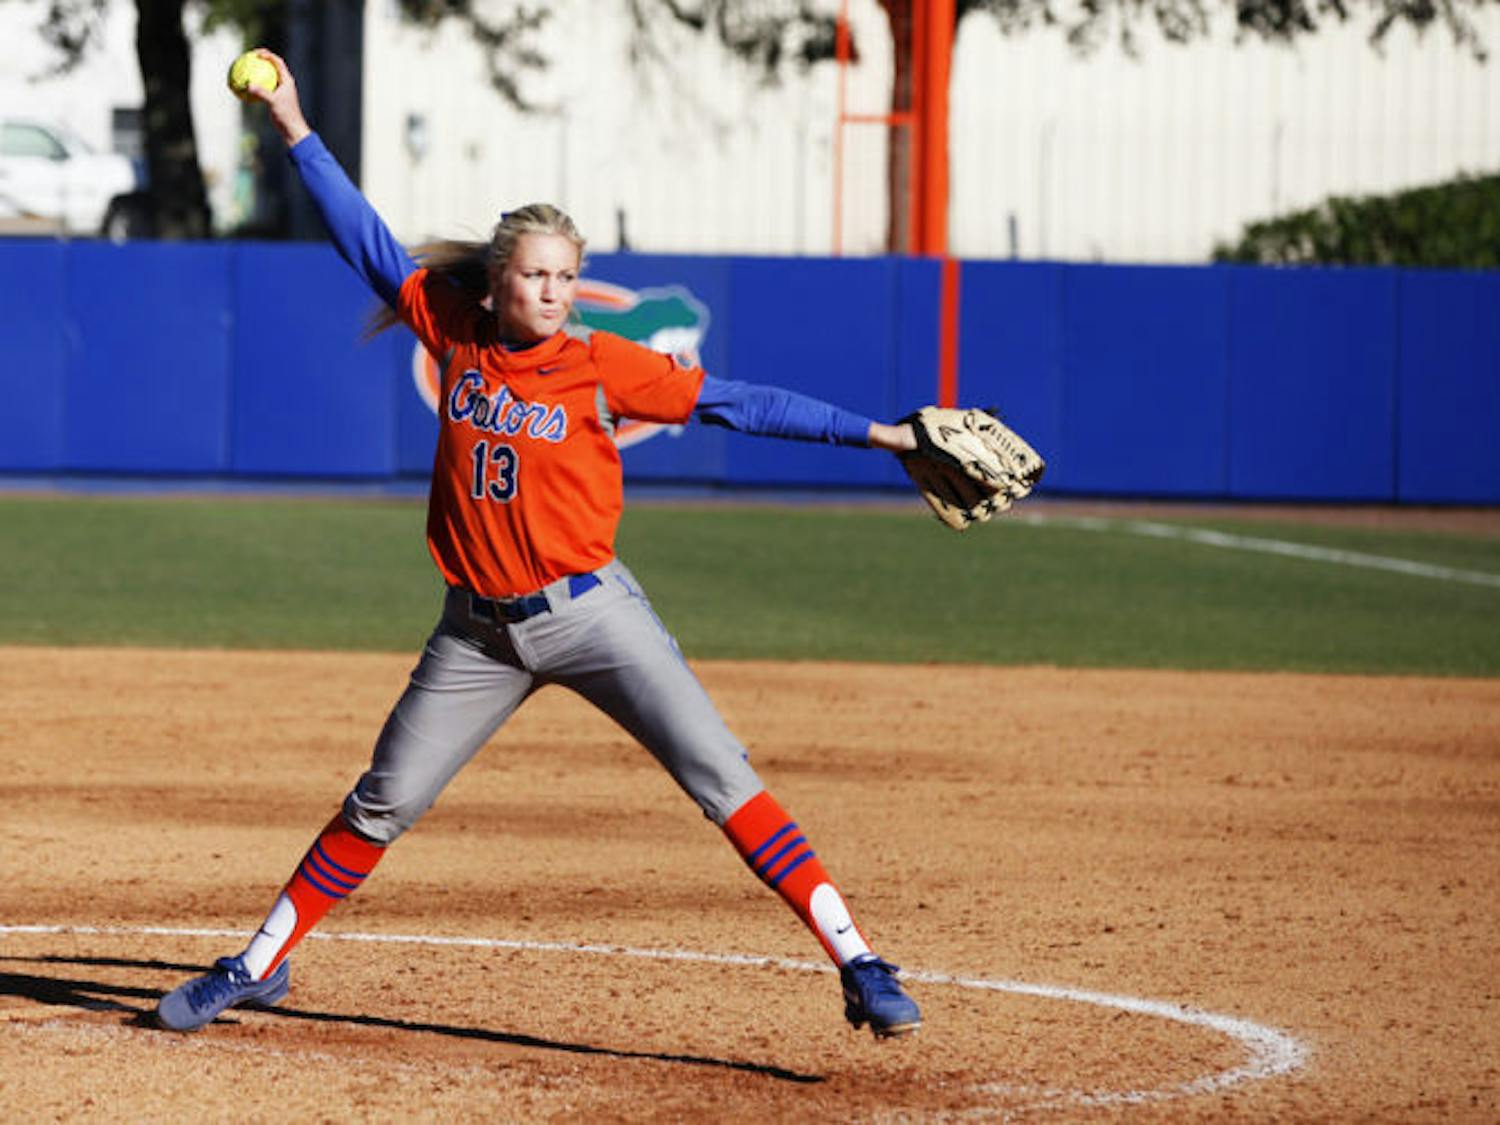 Junior ace Hannah Rogers winds up to pitch during Florida’s 9-1 victory against UNC Wilmington on Feb. 17 at Katie Seashole Pressly Stadium. Rogers tossed 18.2 frames for the Gators at the Mary Nutter Collegiate Classic in Palm Springs, Calif.